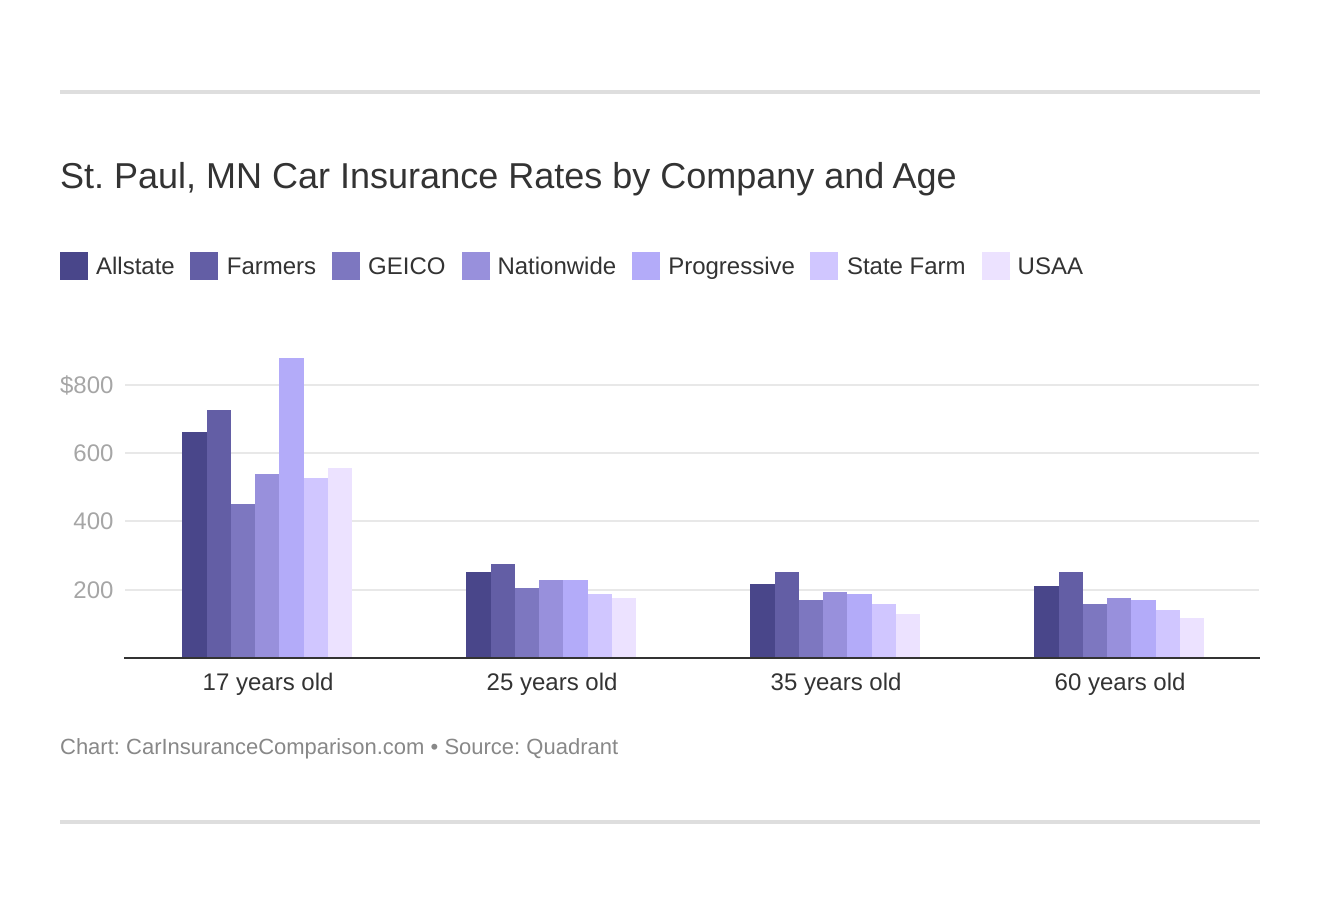 St. Paul, MN Car Insurance Rates by Company and Age